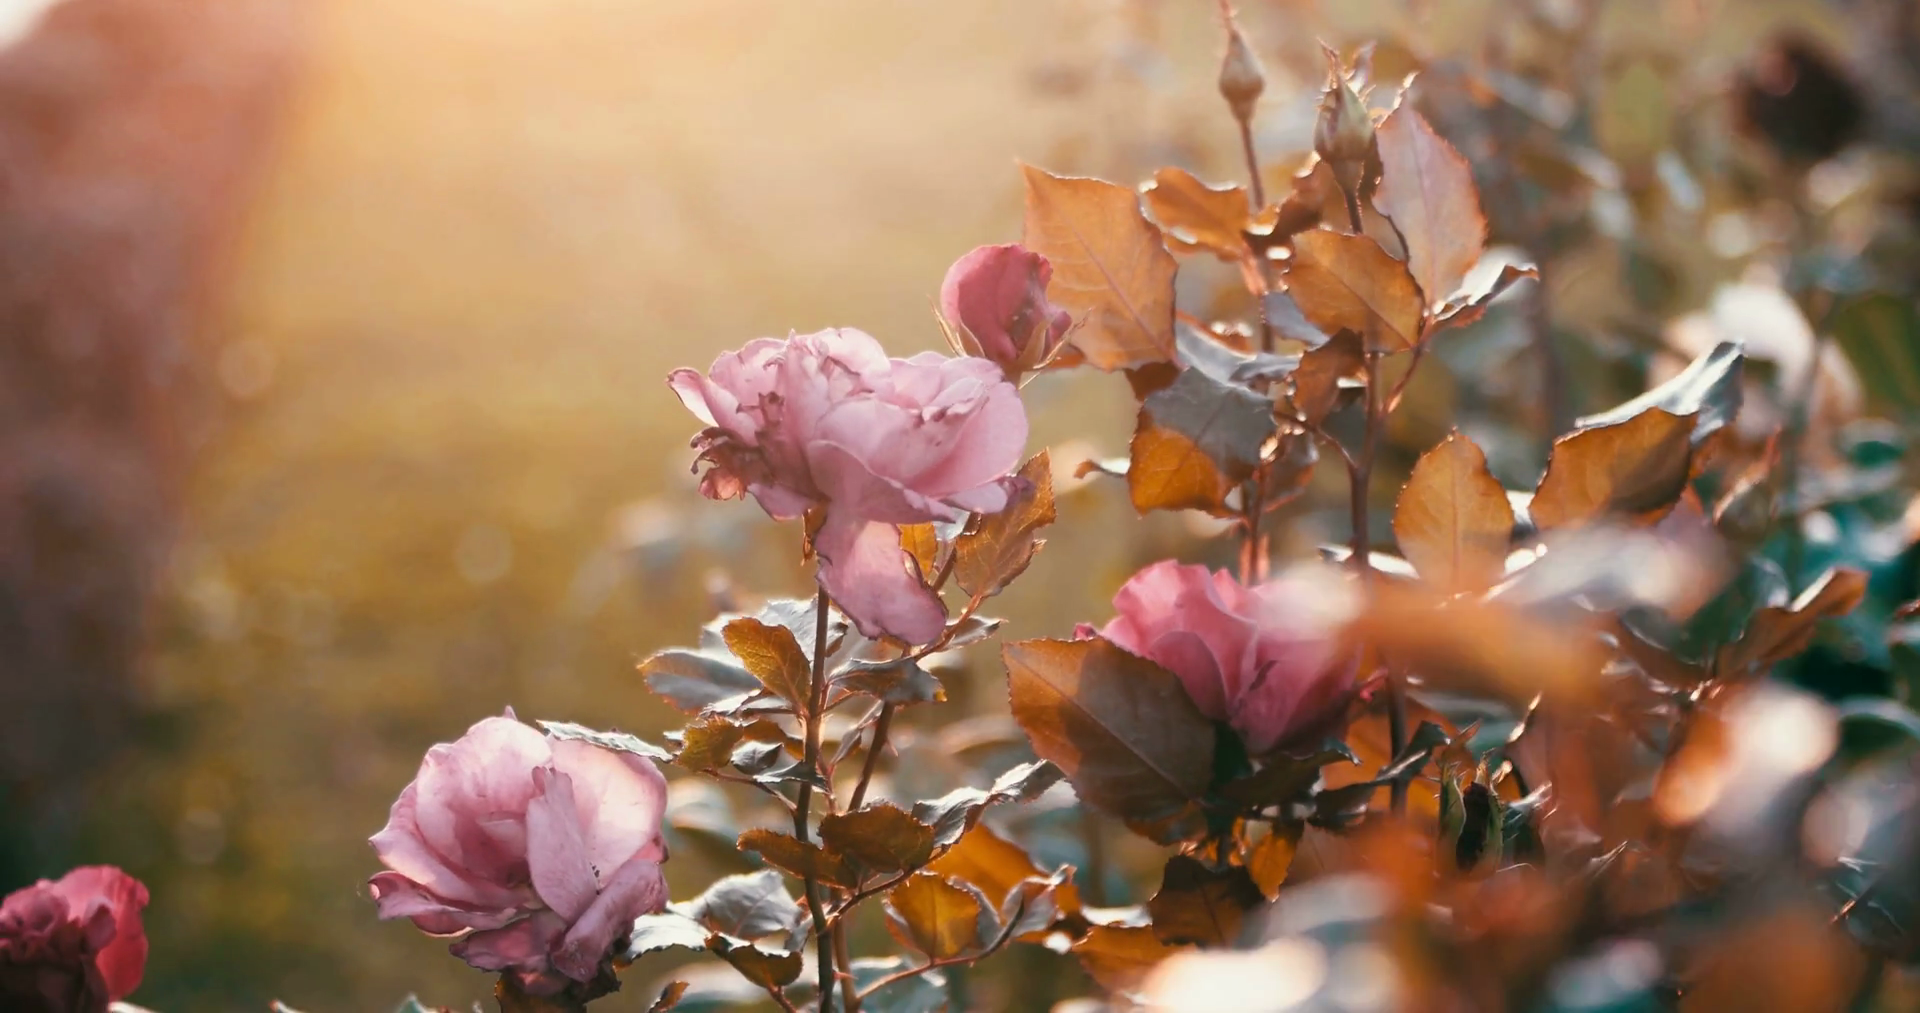 Sad autumn roses in decay garden backlit, colorized toned shot ...